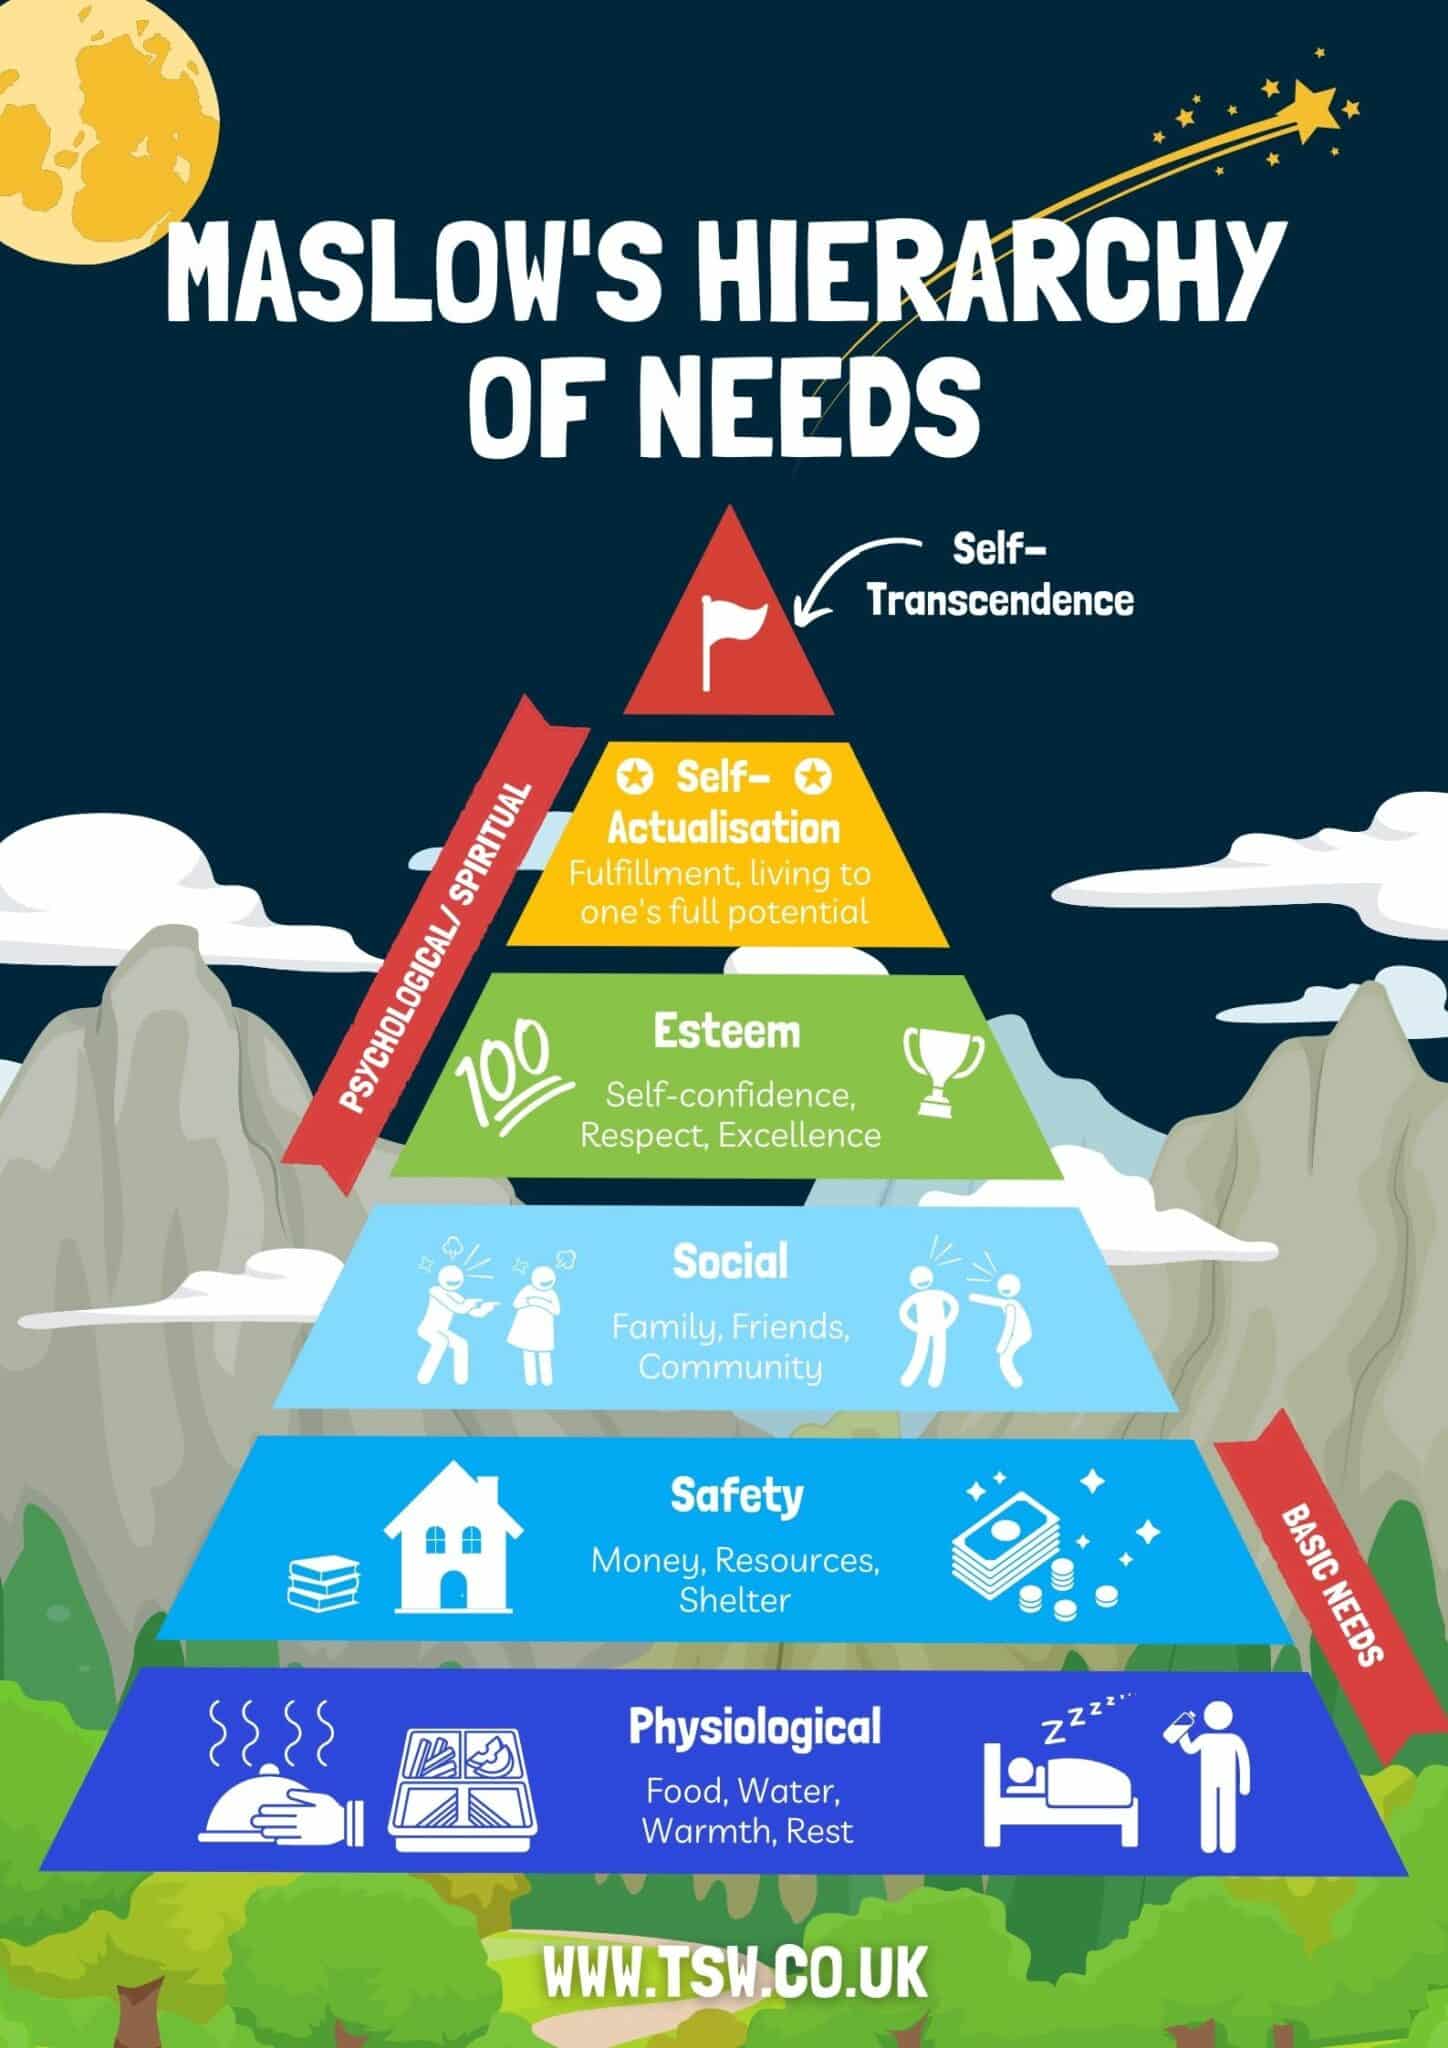 Maslow's Pyramid Hierarchy showing 6 levels of motivation